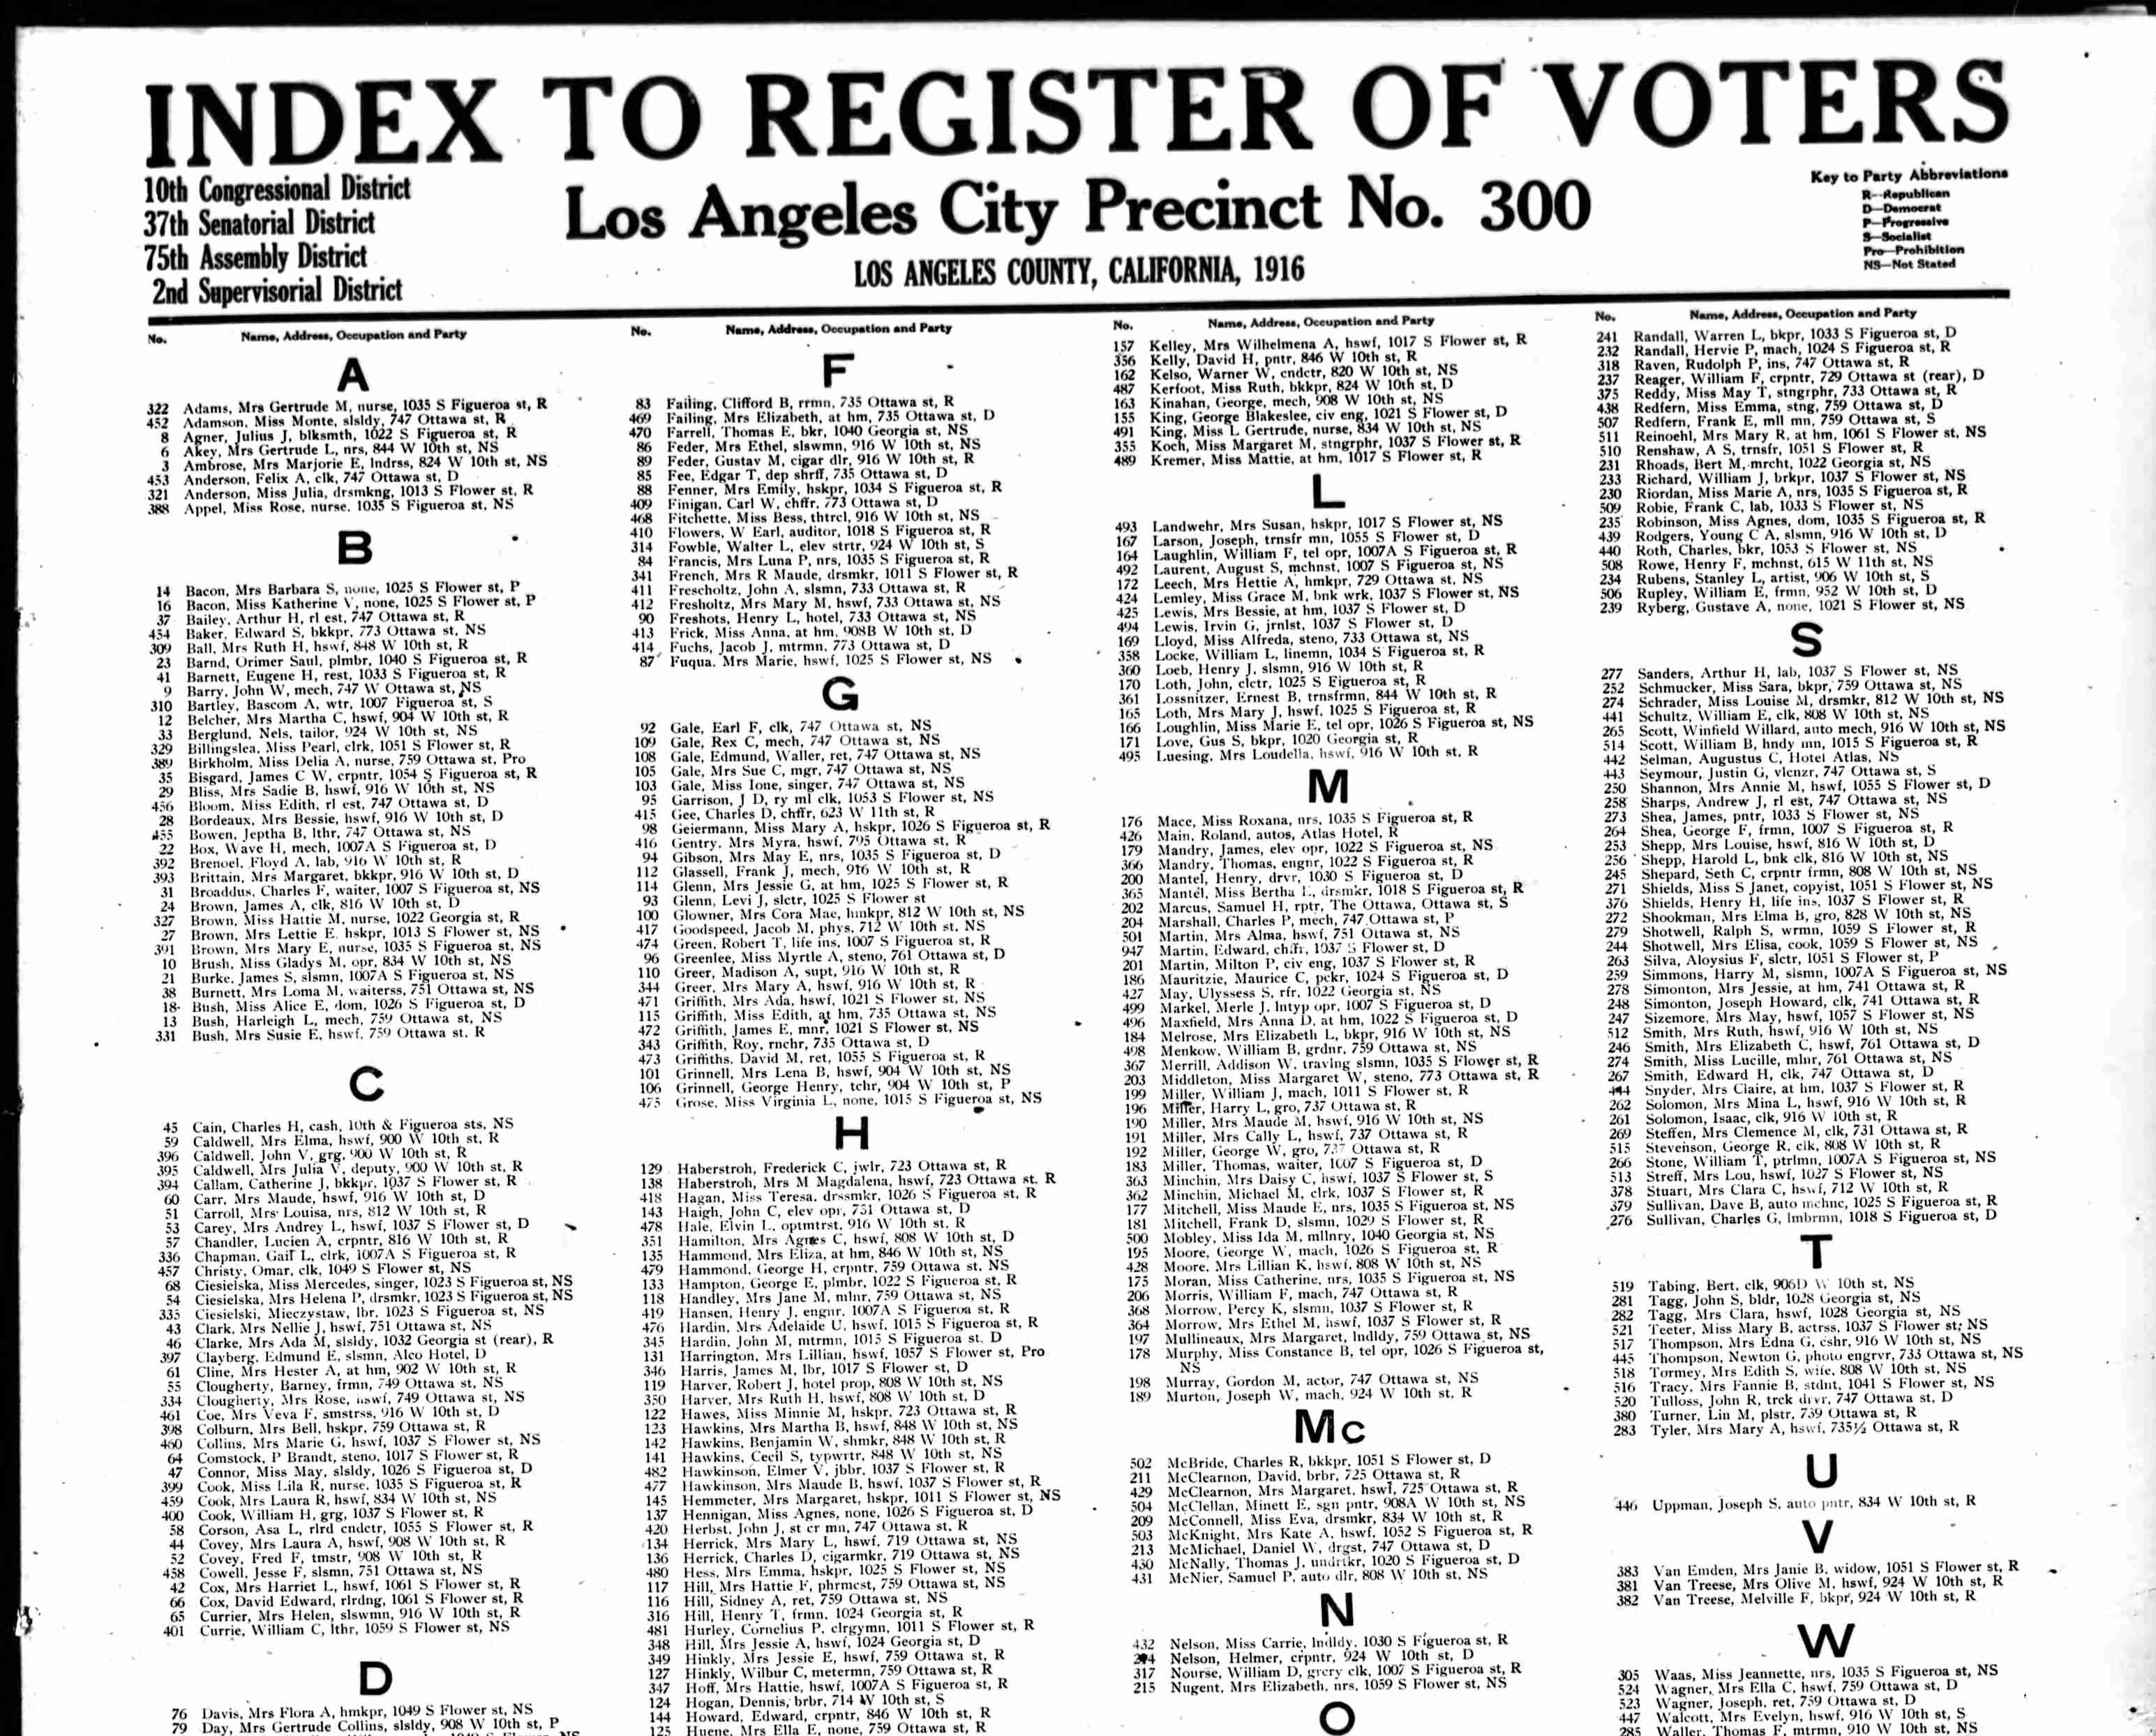 Clara and husband John S Tagg on Los Angeles voters list in 1916